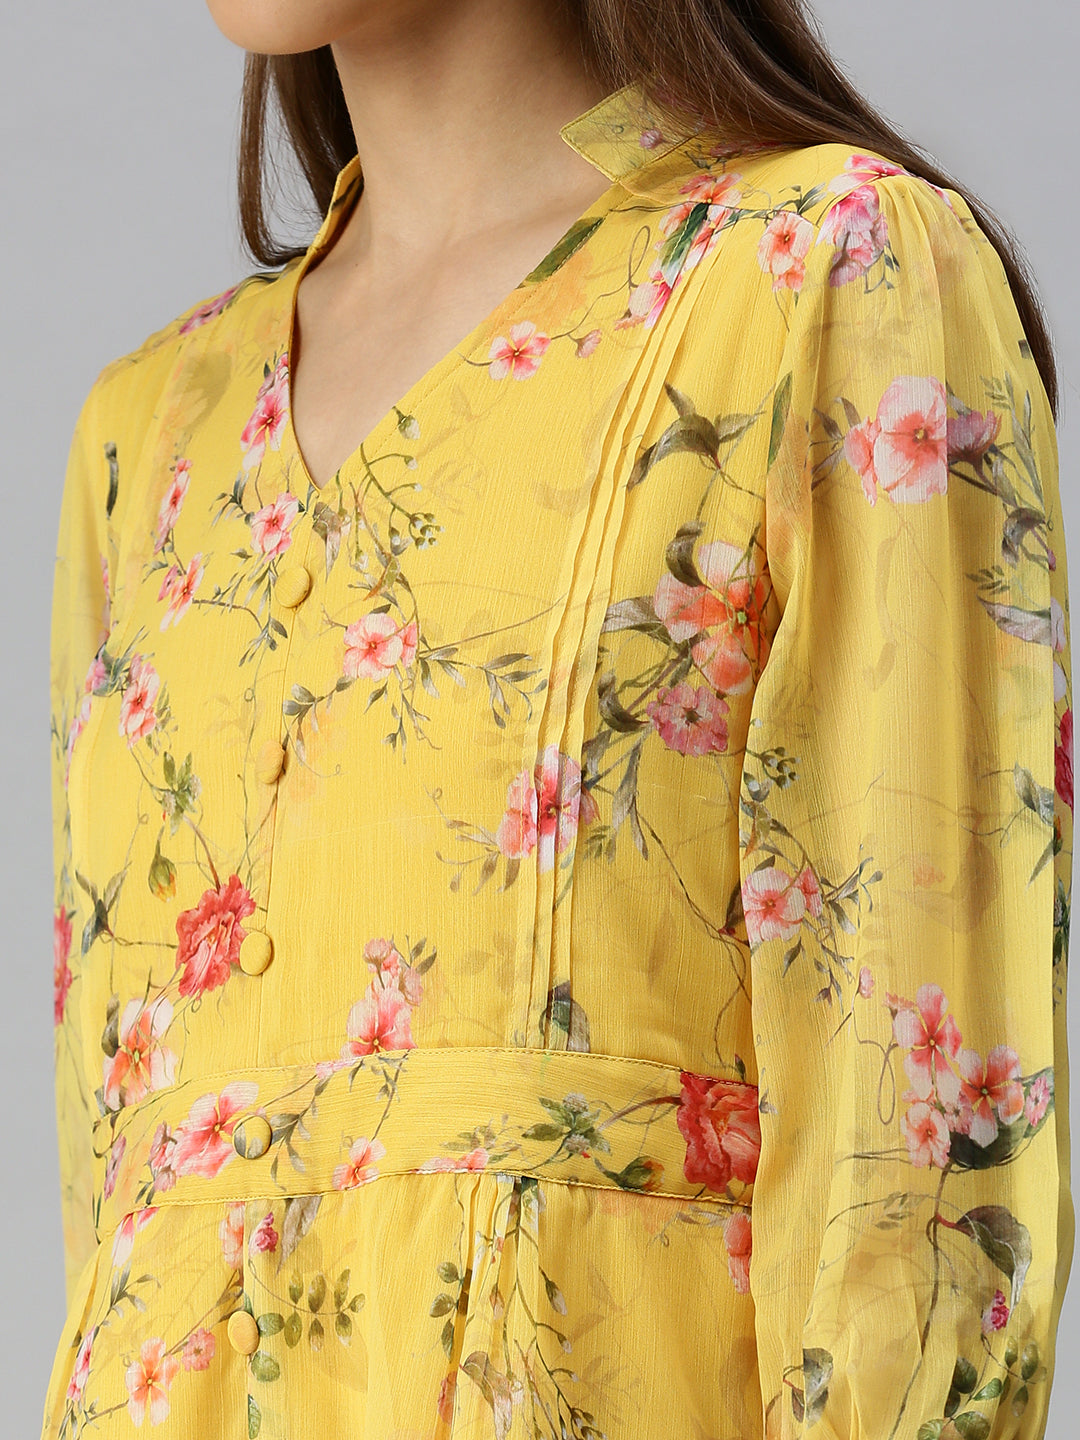 Women's Yellow Printed Fit and Flare Dress